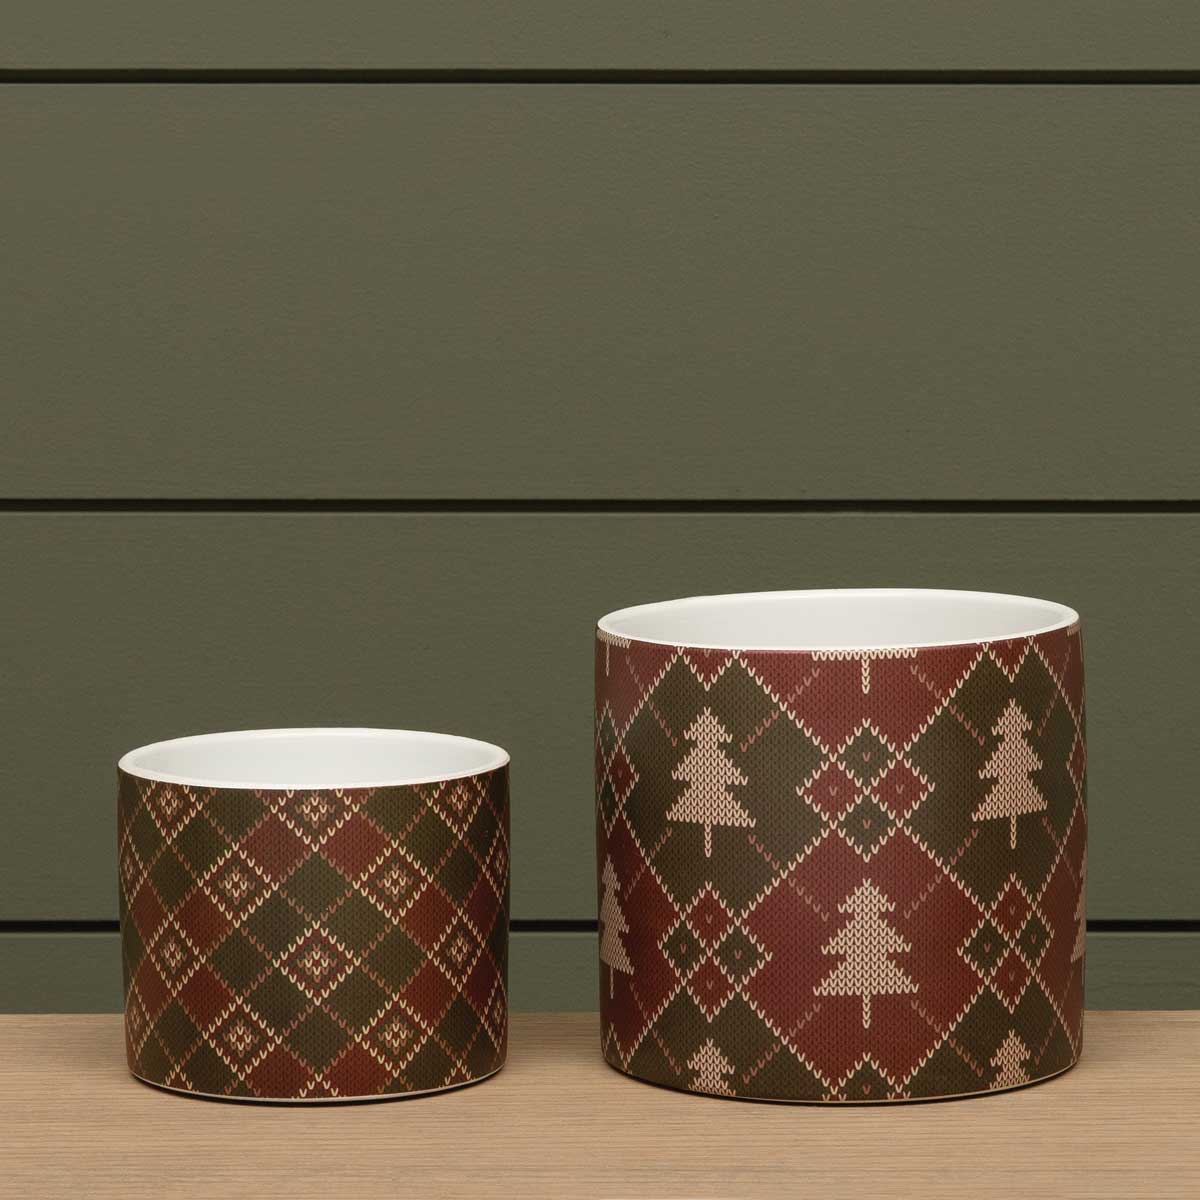 POT ALPINE PLAID LARGE 5.25IN X 4.75IN RED/GREEN CERAMIC - Click Image to Close